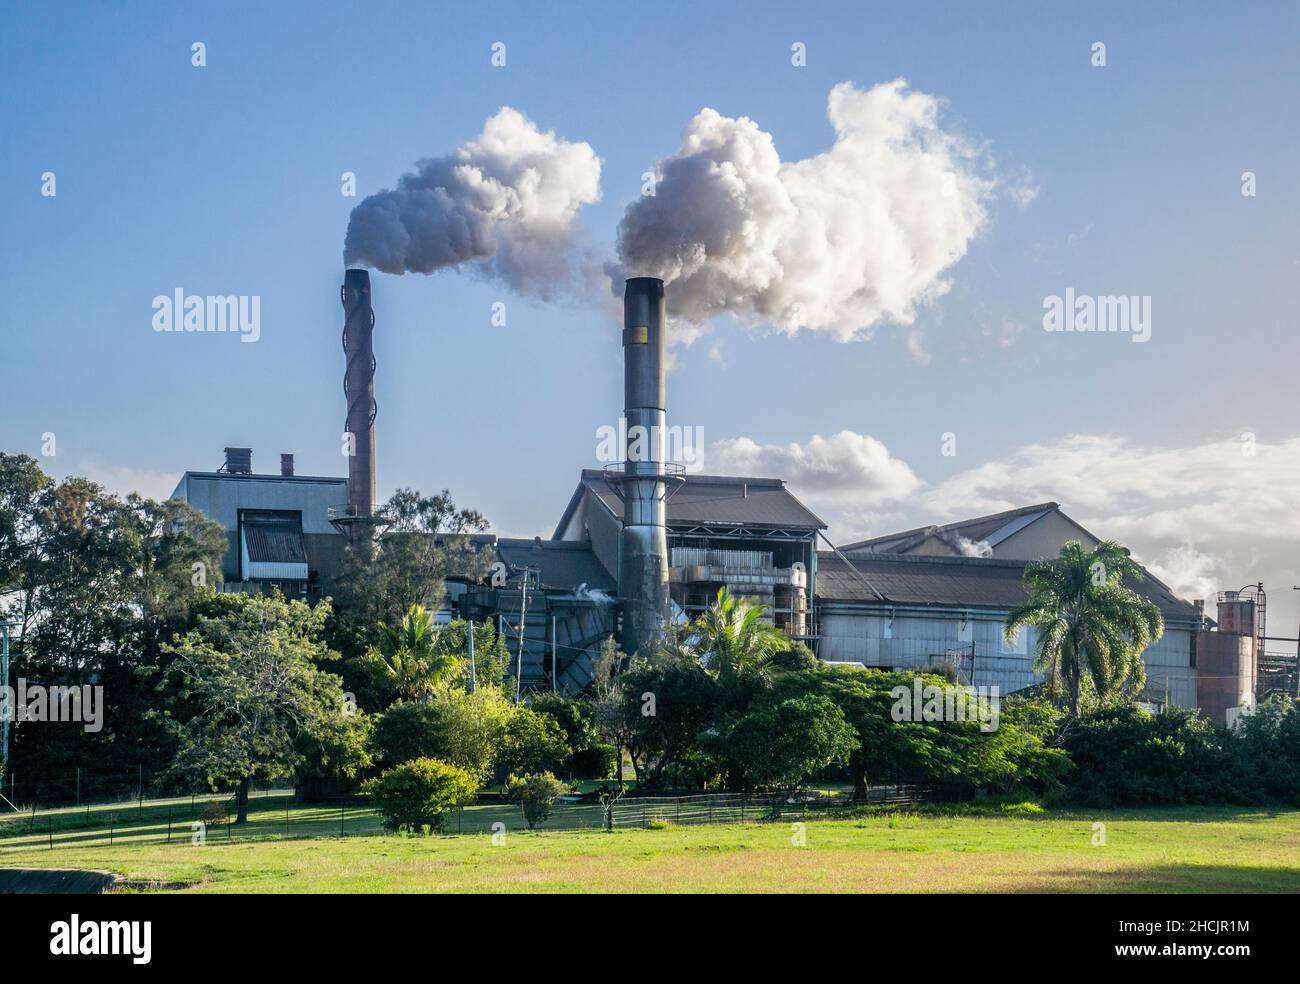 view of the Millaquin Sugar Mill and Bundaberg Distilling Company, hime of the famous 'Bundy' rum, Bundaberg, Queensland, Australia Stock Photo